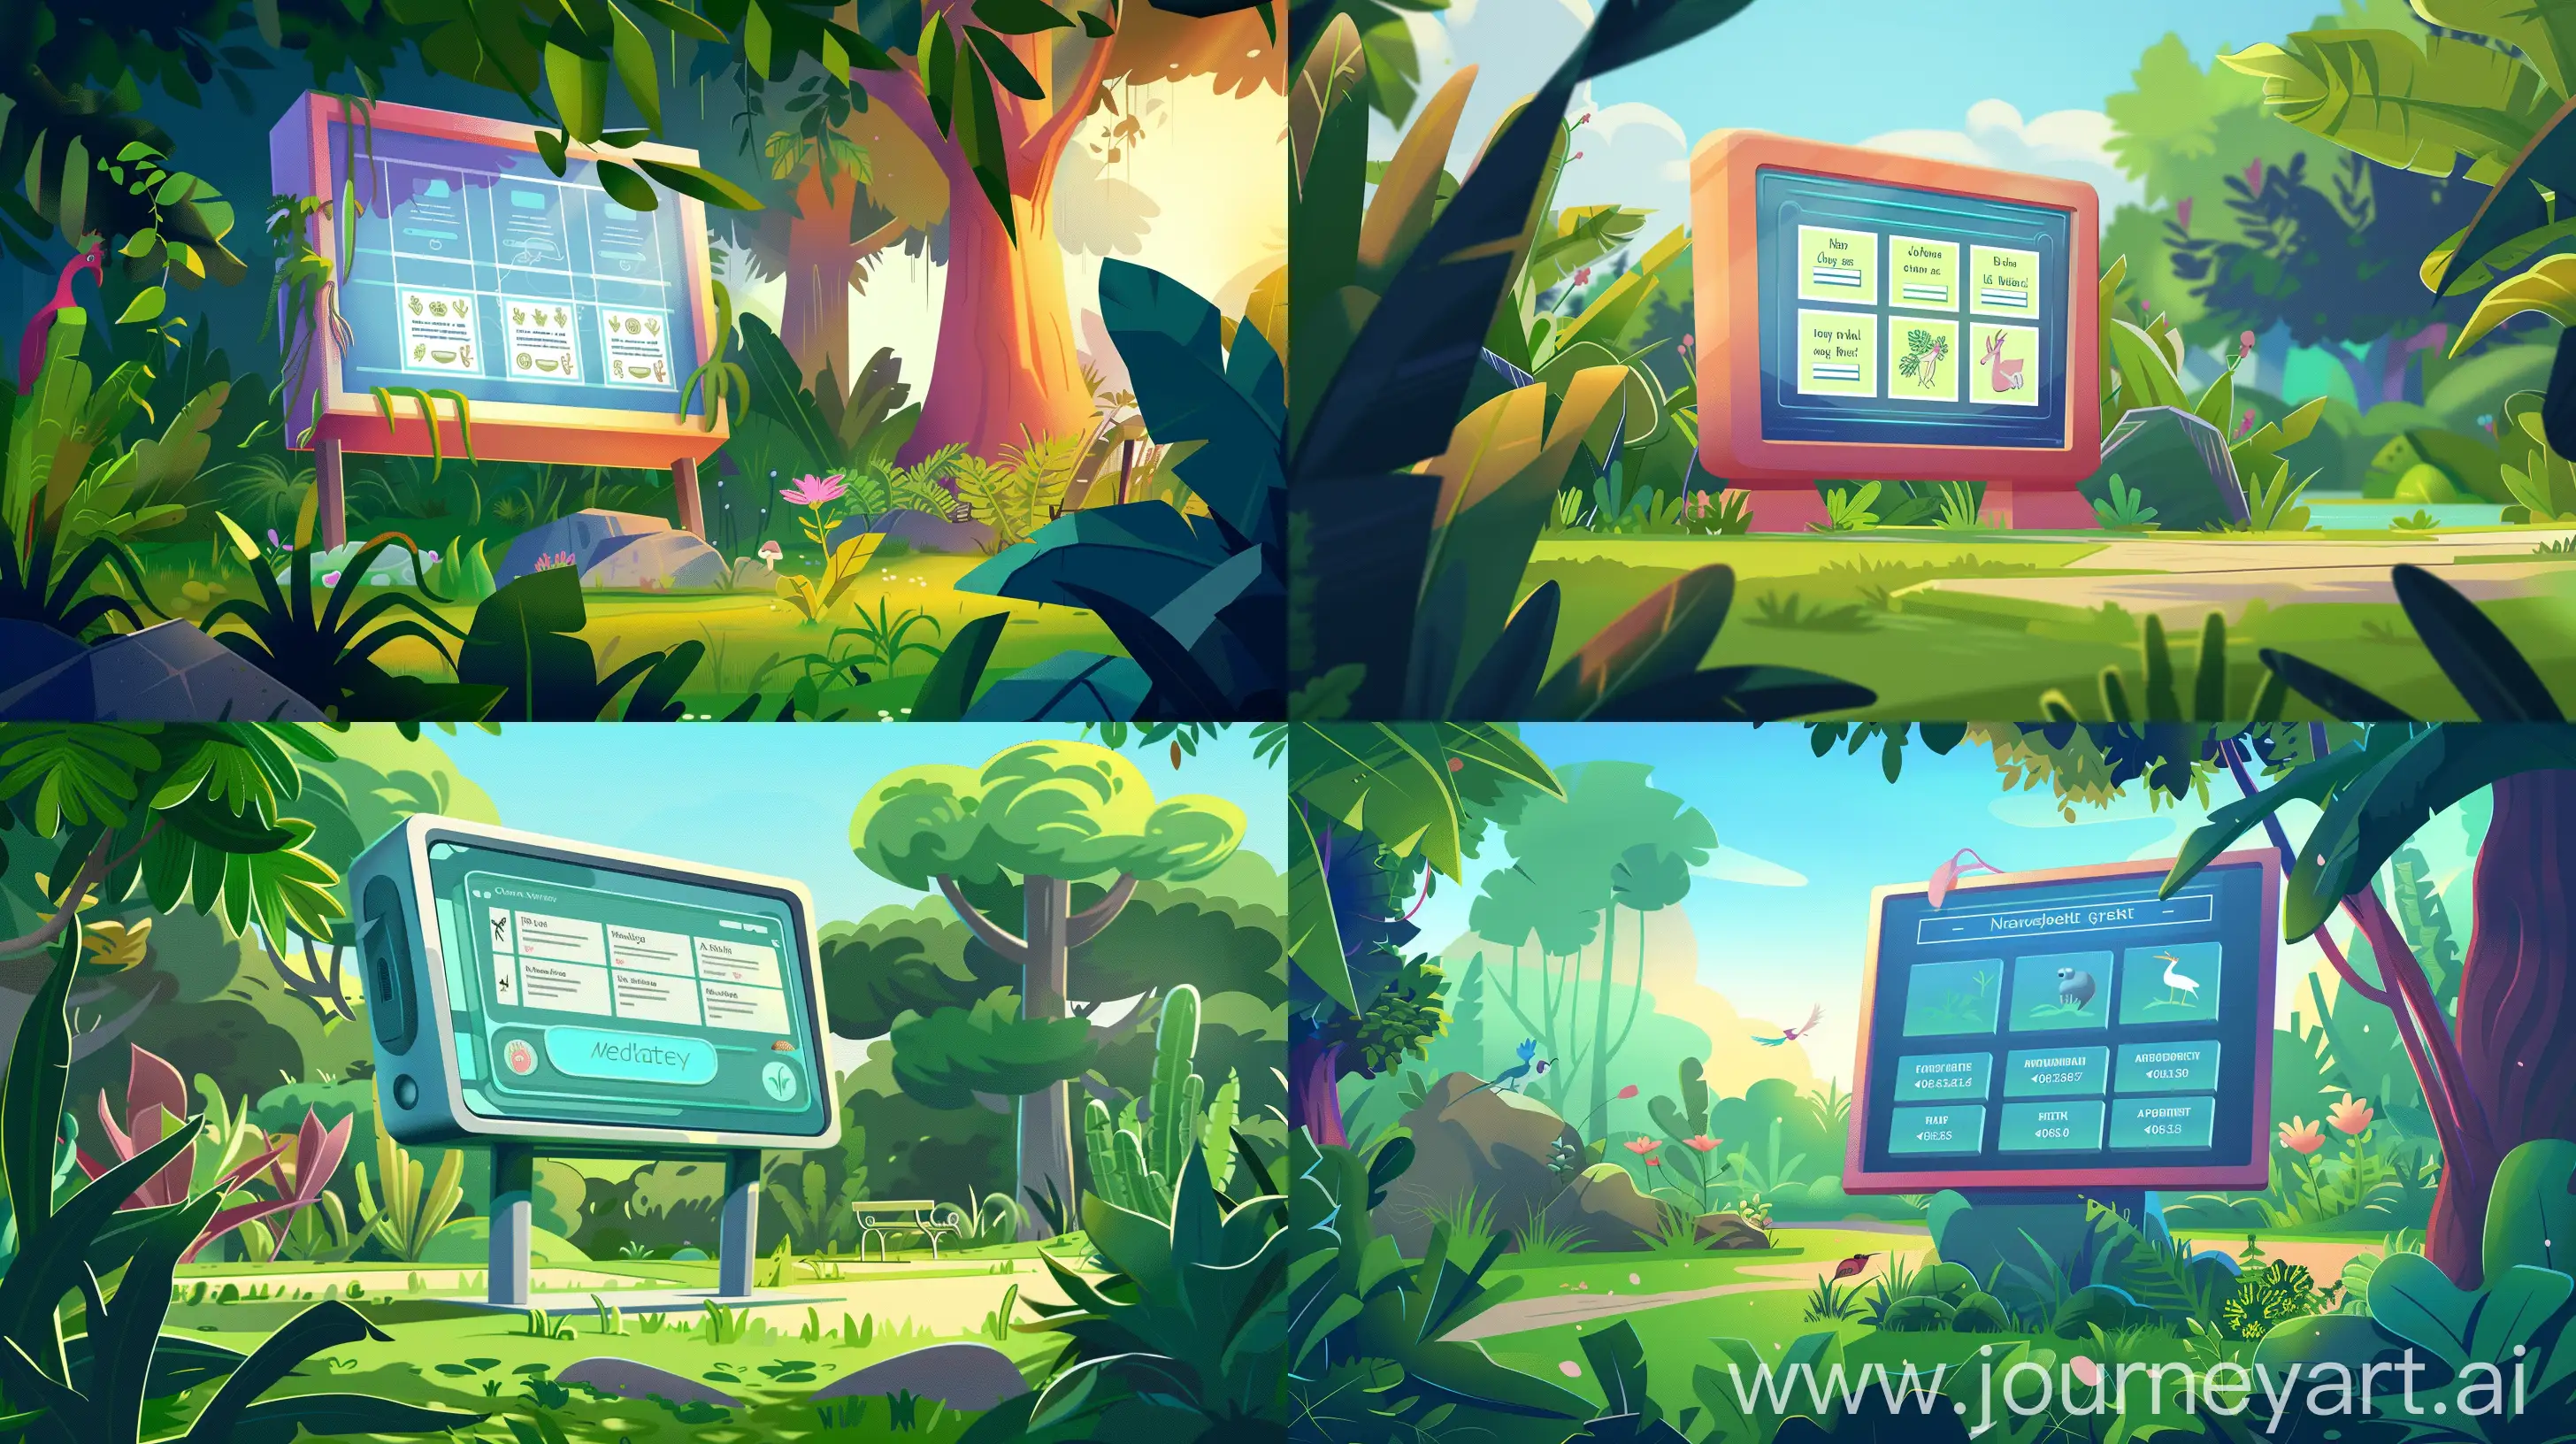 "Cartoon-style illustration of a digital game interface, displayed outdoors in a vibrant, lush park. The screen shows nature-themed quiz questions about wildlife and plants, integrated seamlessly into the natural surroundings. The setting is lively and colorful, symbolizing the connection between humans and nature. Lighting is bright and cheerful, emphasizing a fun and educational atmosphere. --ar 16:9 --v 6.0 --style raw"